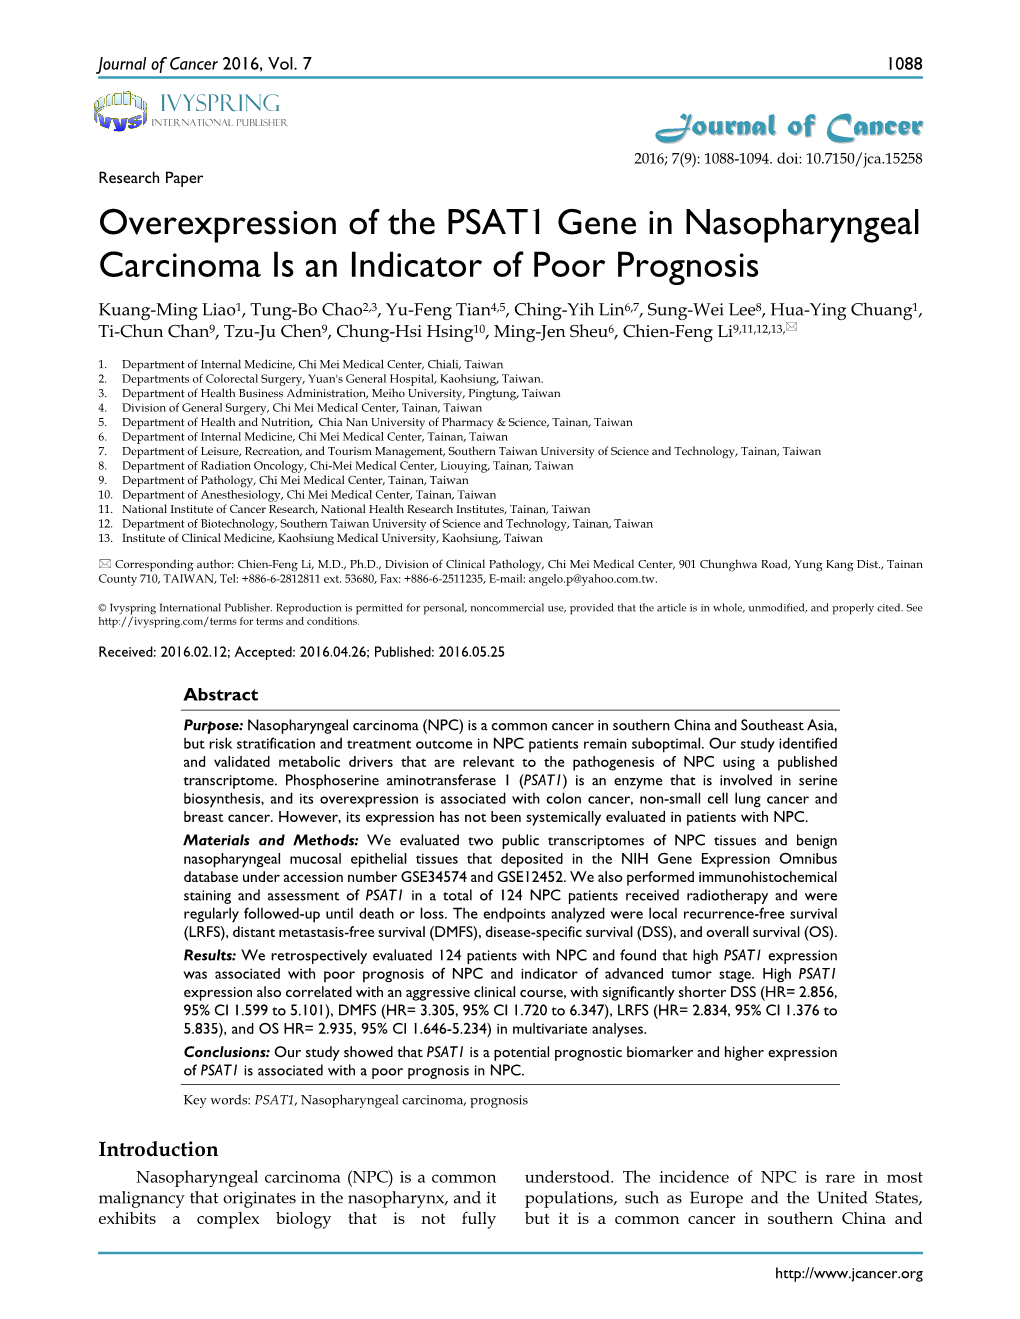 Overexpression of the PSAT1 Gene in Nasopharyngeal Carcinoma Is An